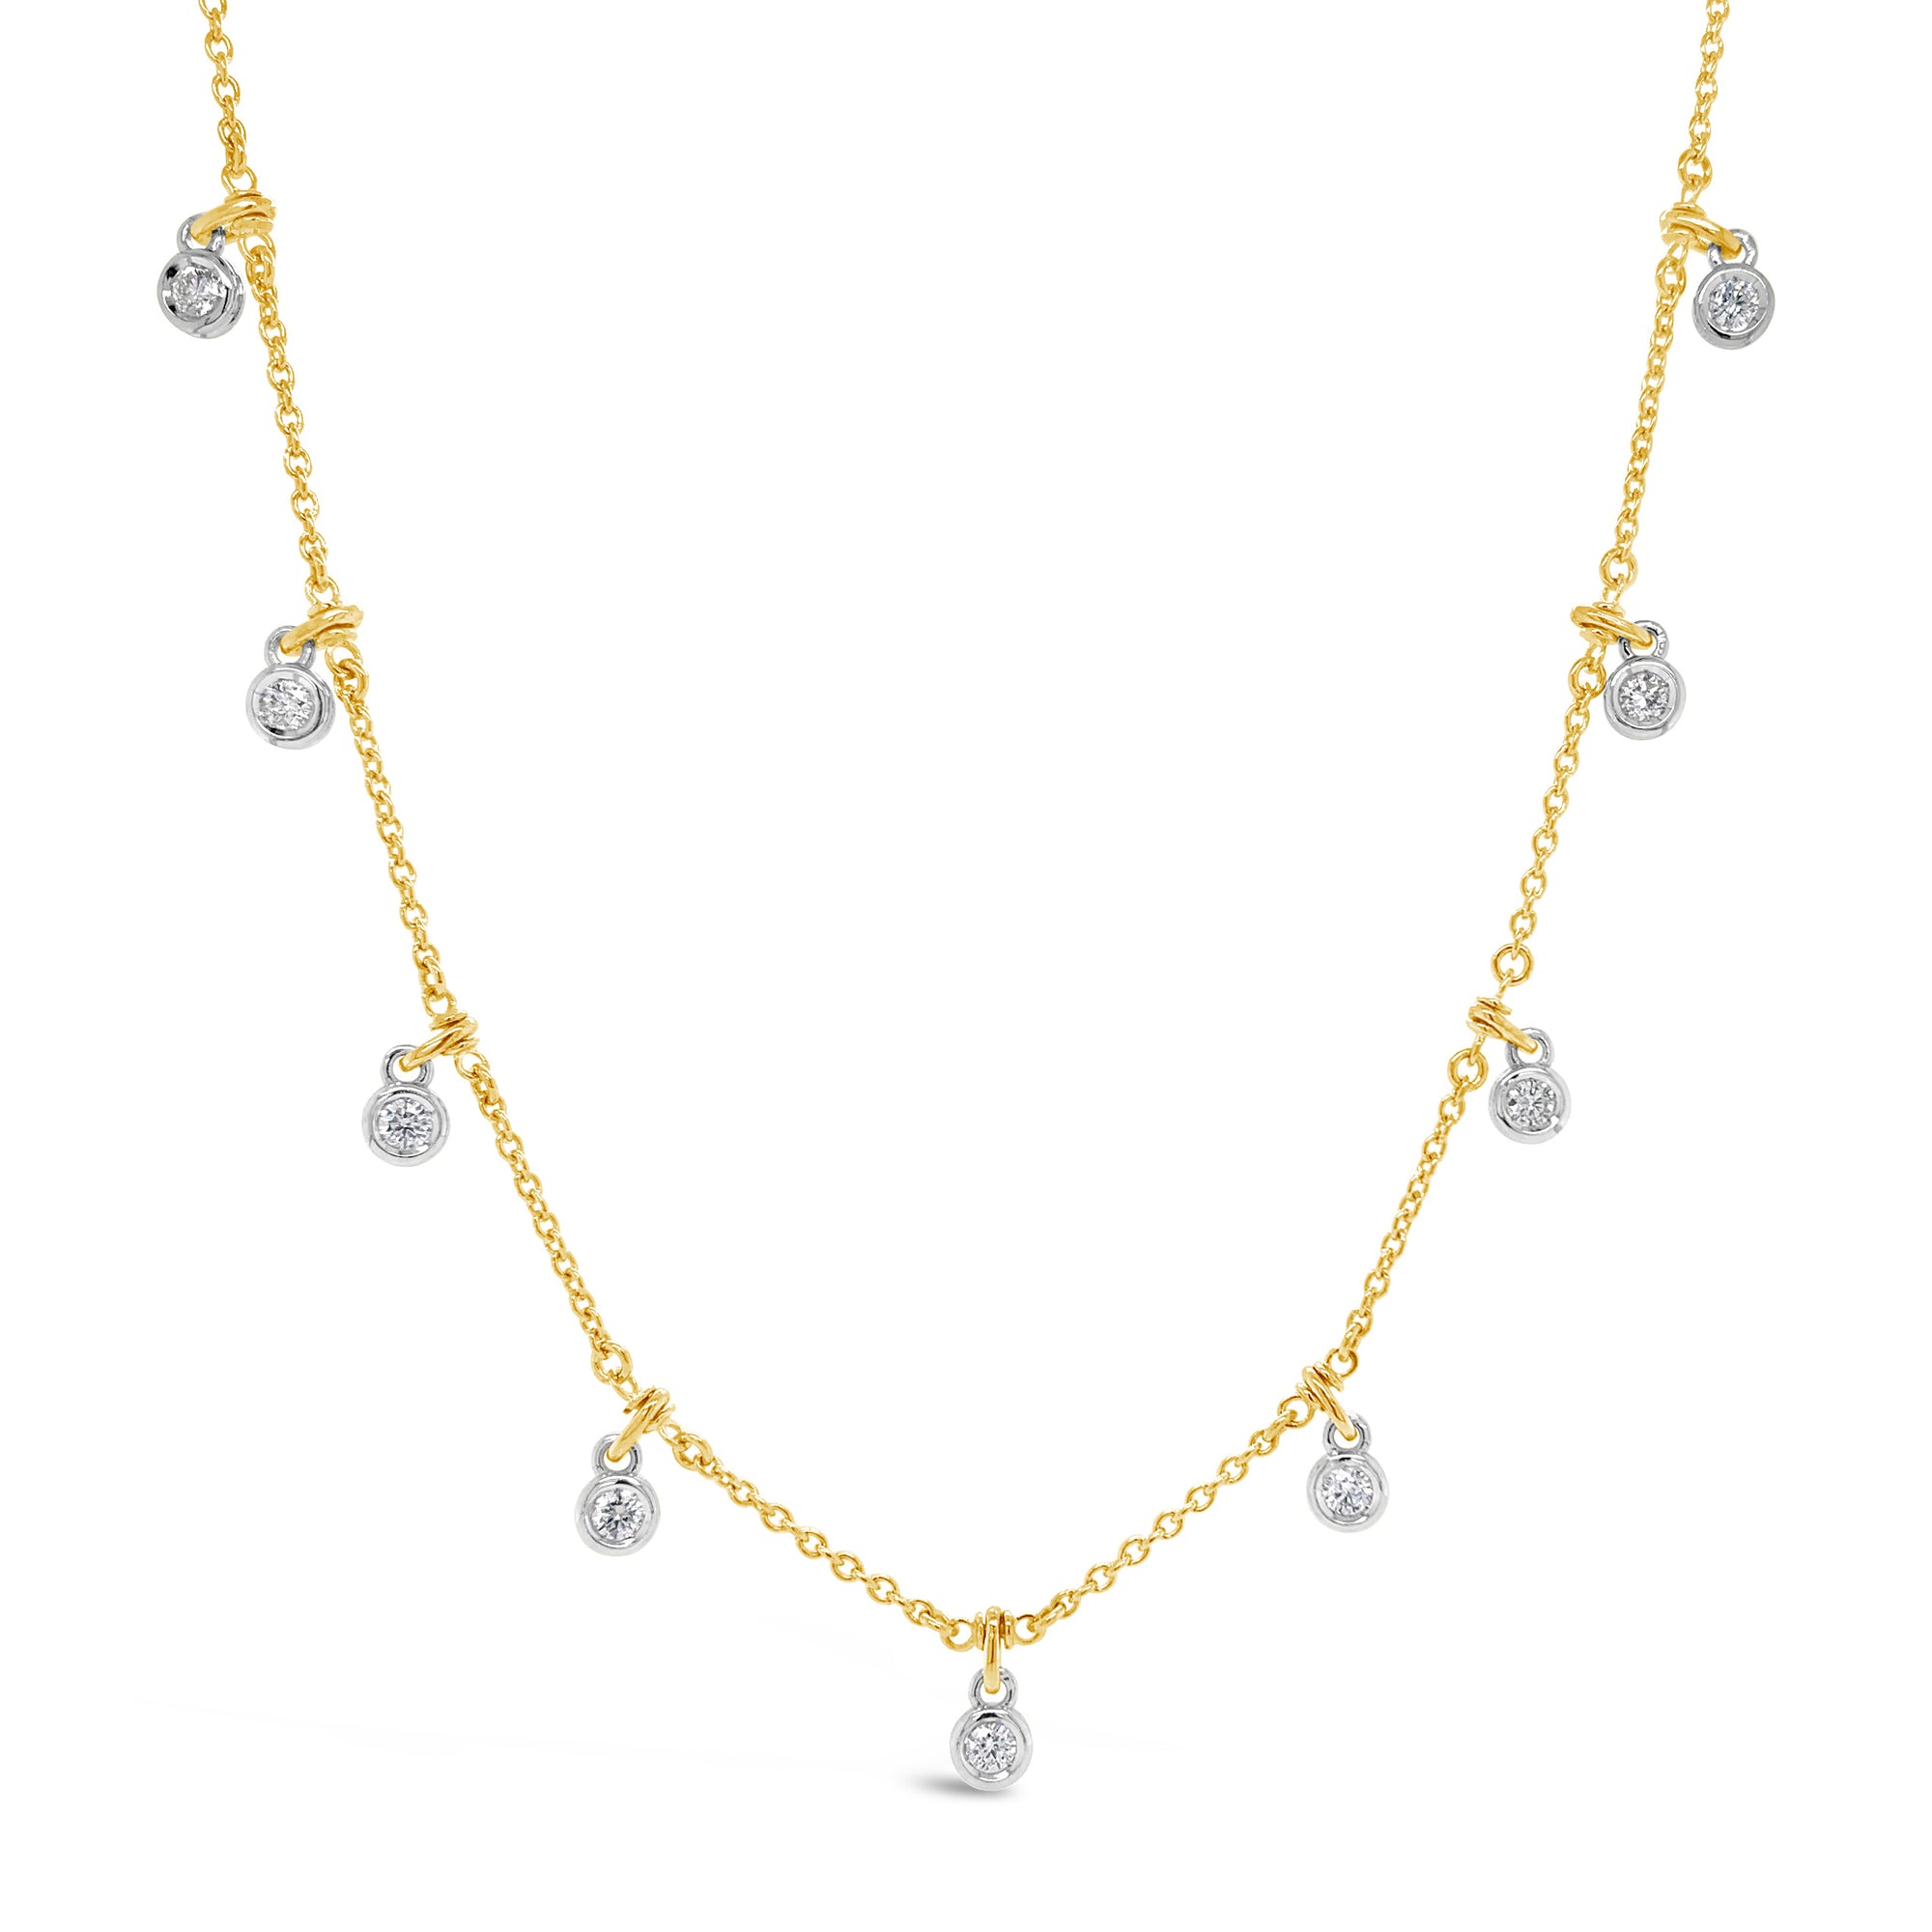 Diamond by the Yard Drip Necklace  - 14K gold weighing 6.25 grams.  - 9 round diamonds totaling 0.61 carats.